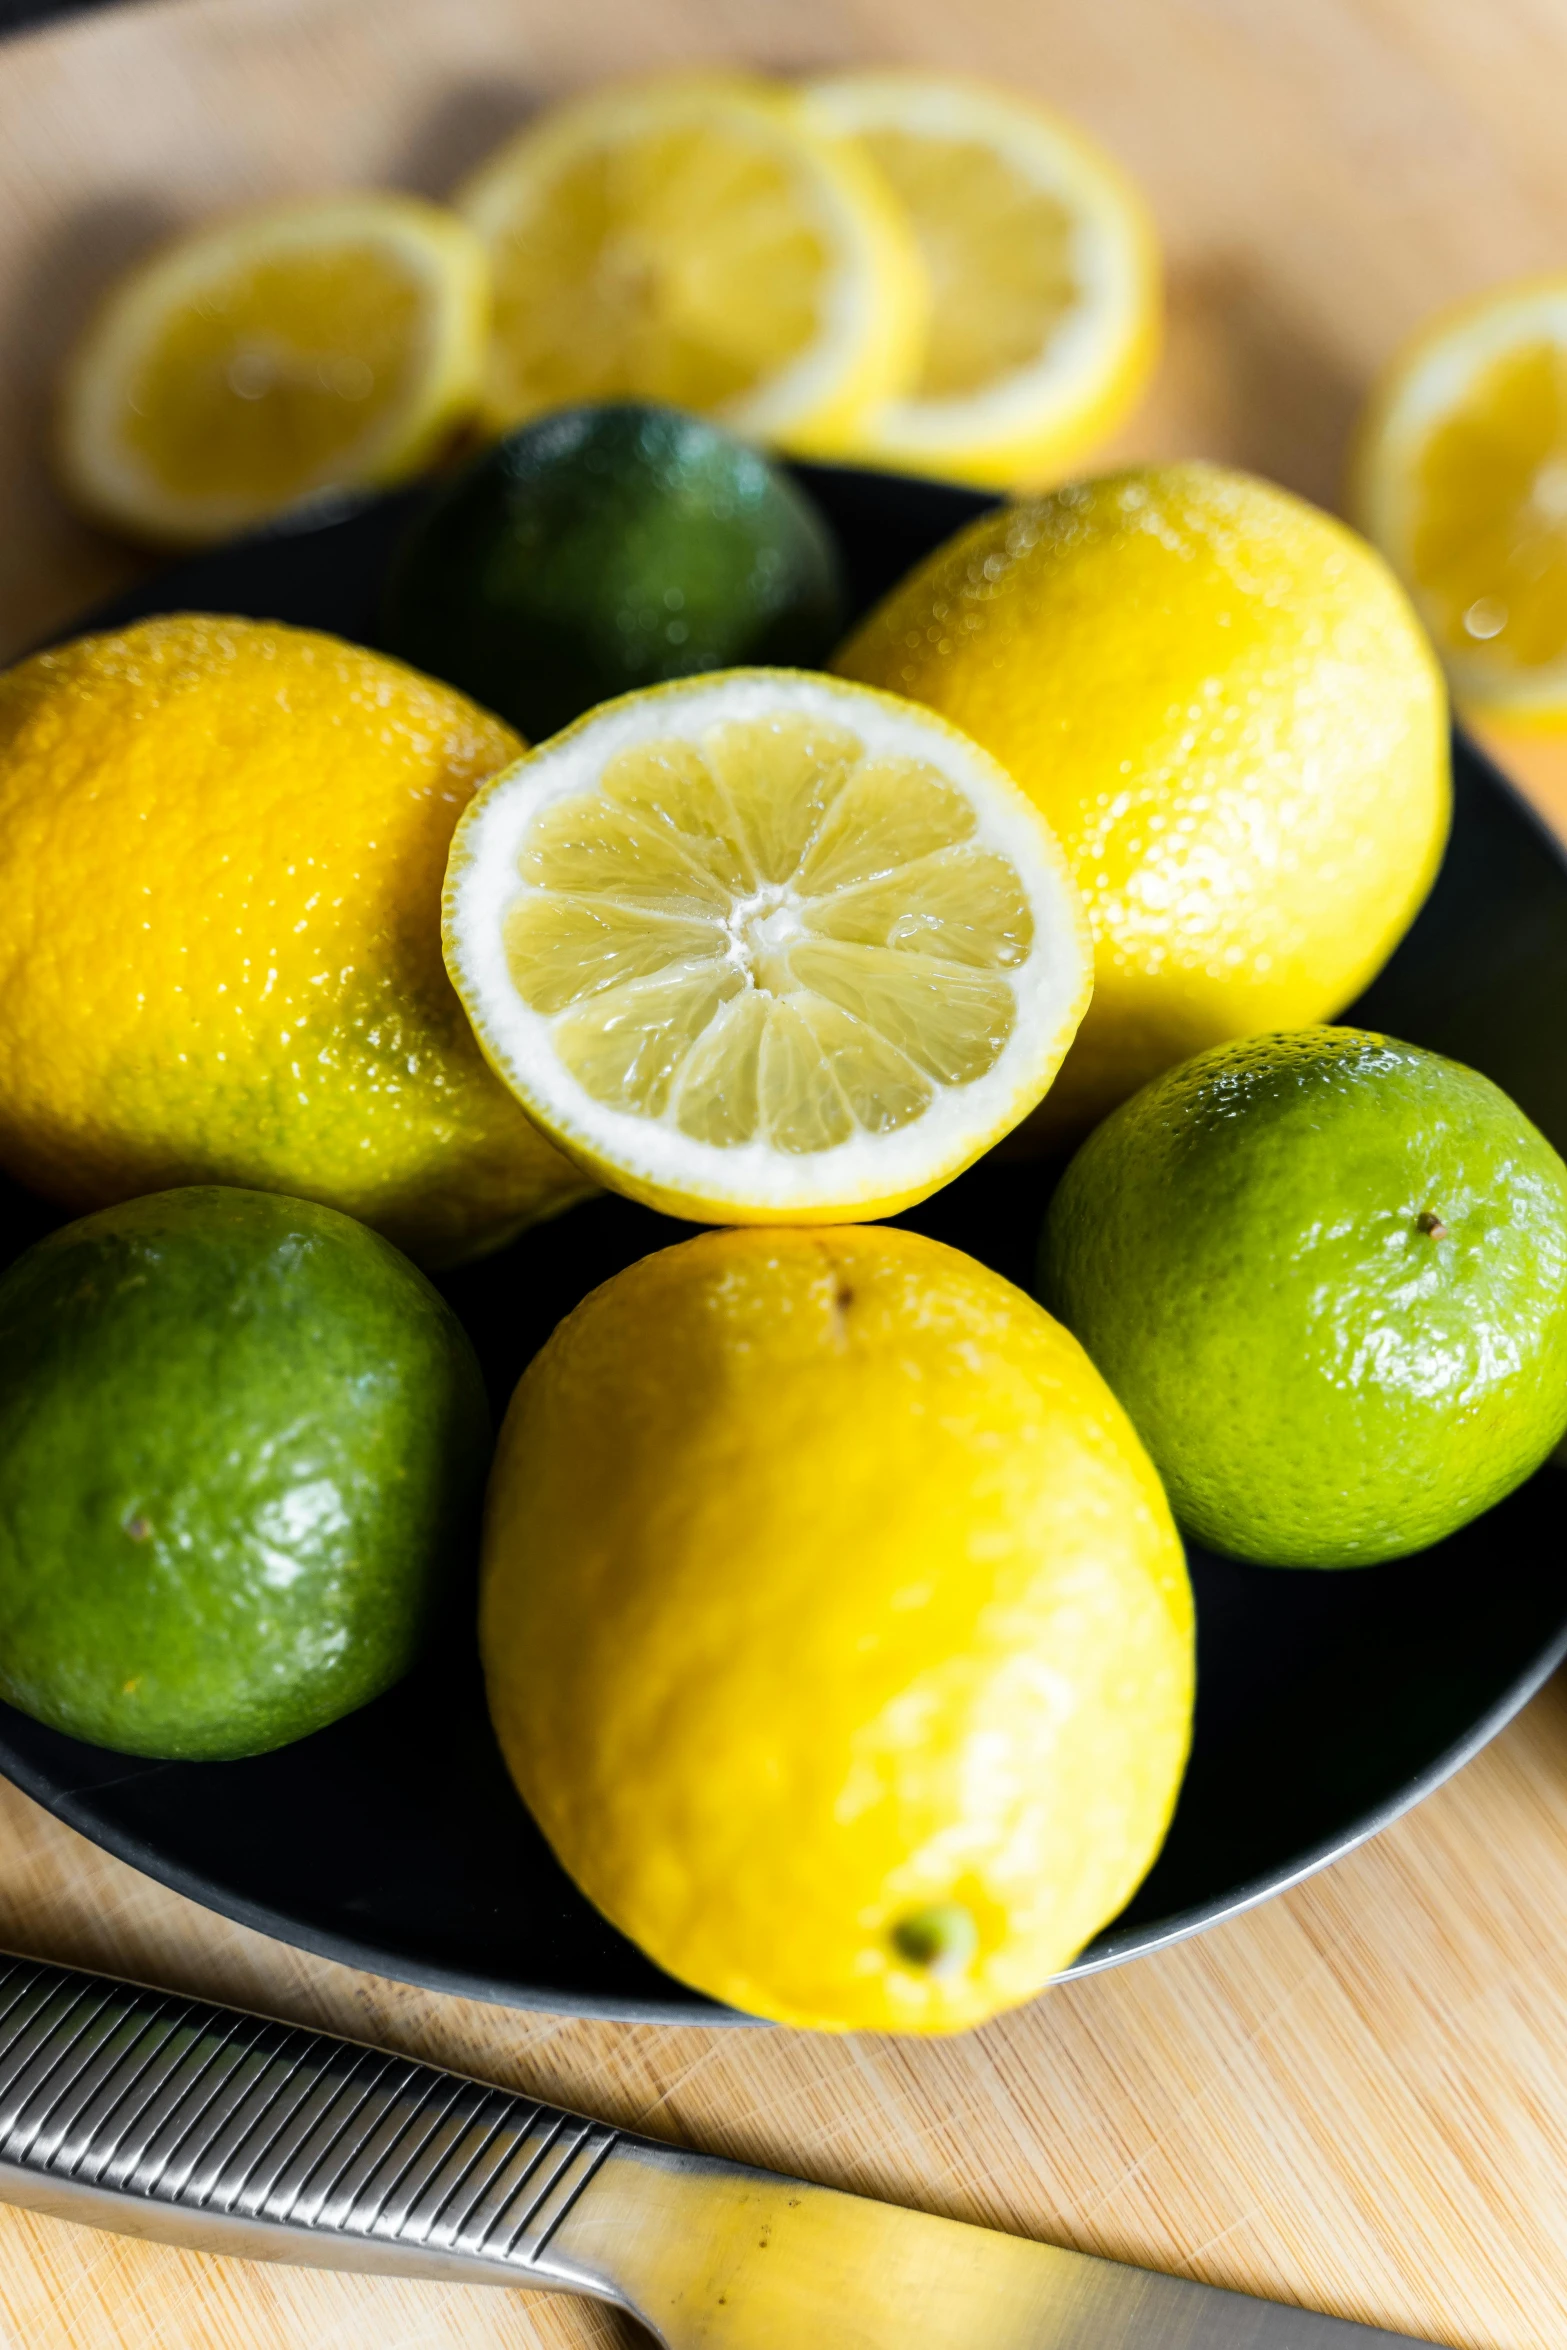 a plate of lemons and limes on a table, piled around, close together, bowl of fruit, upclose